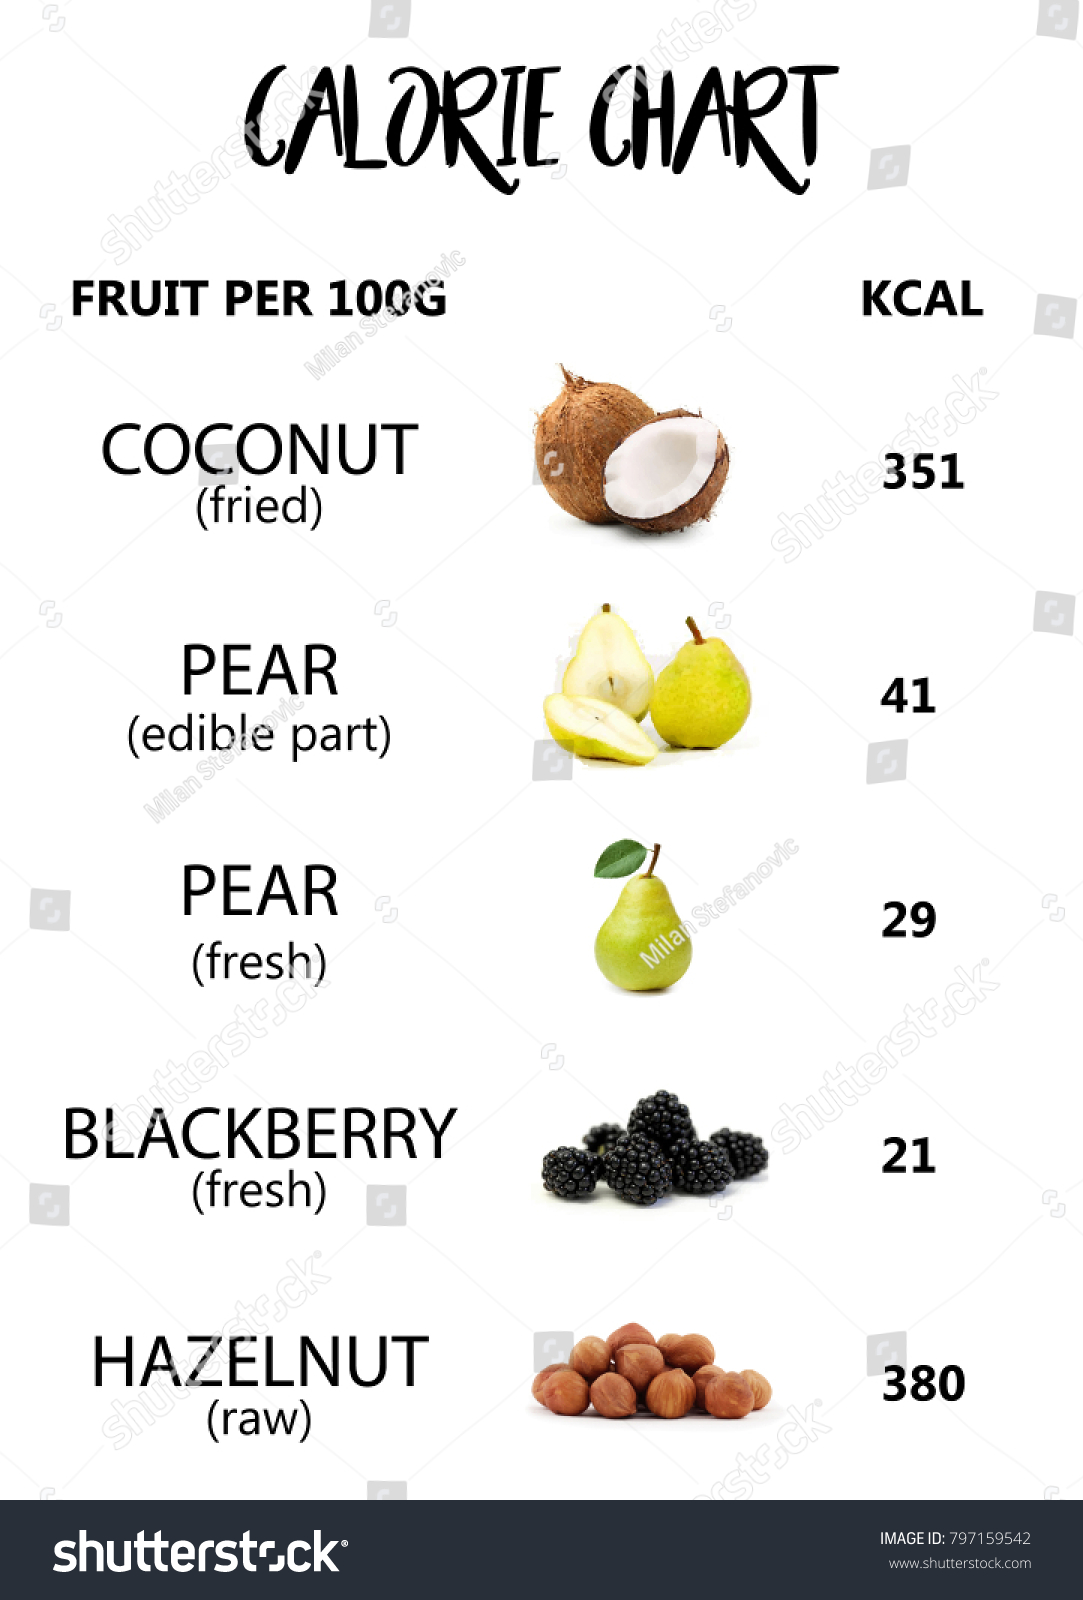 Calorie Chart For All Food Groups